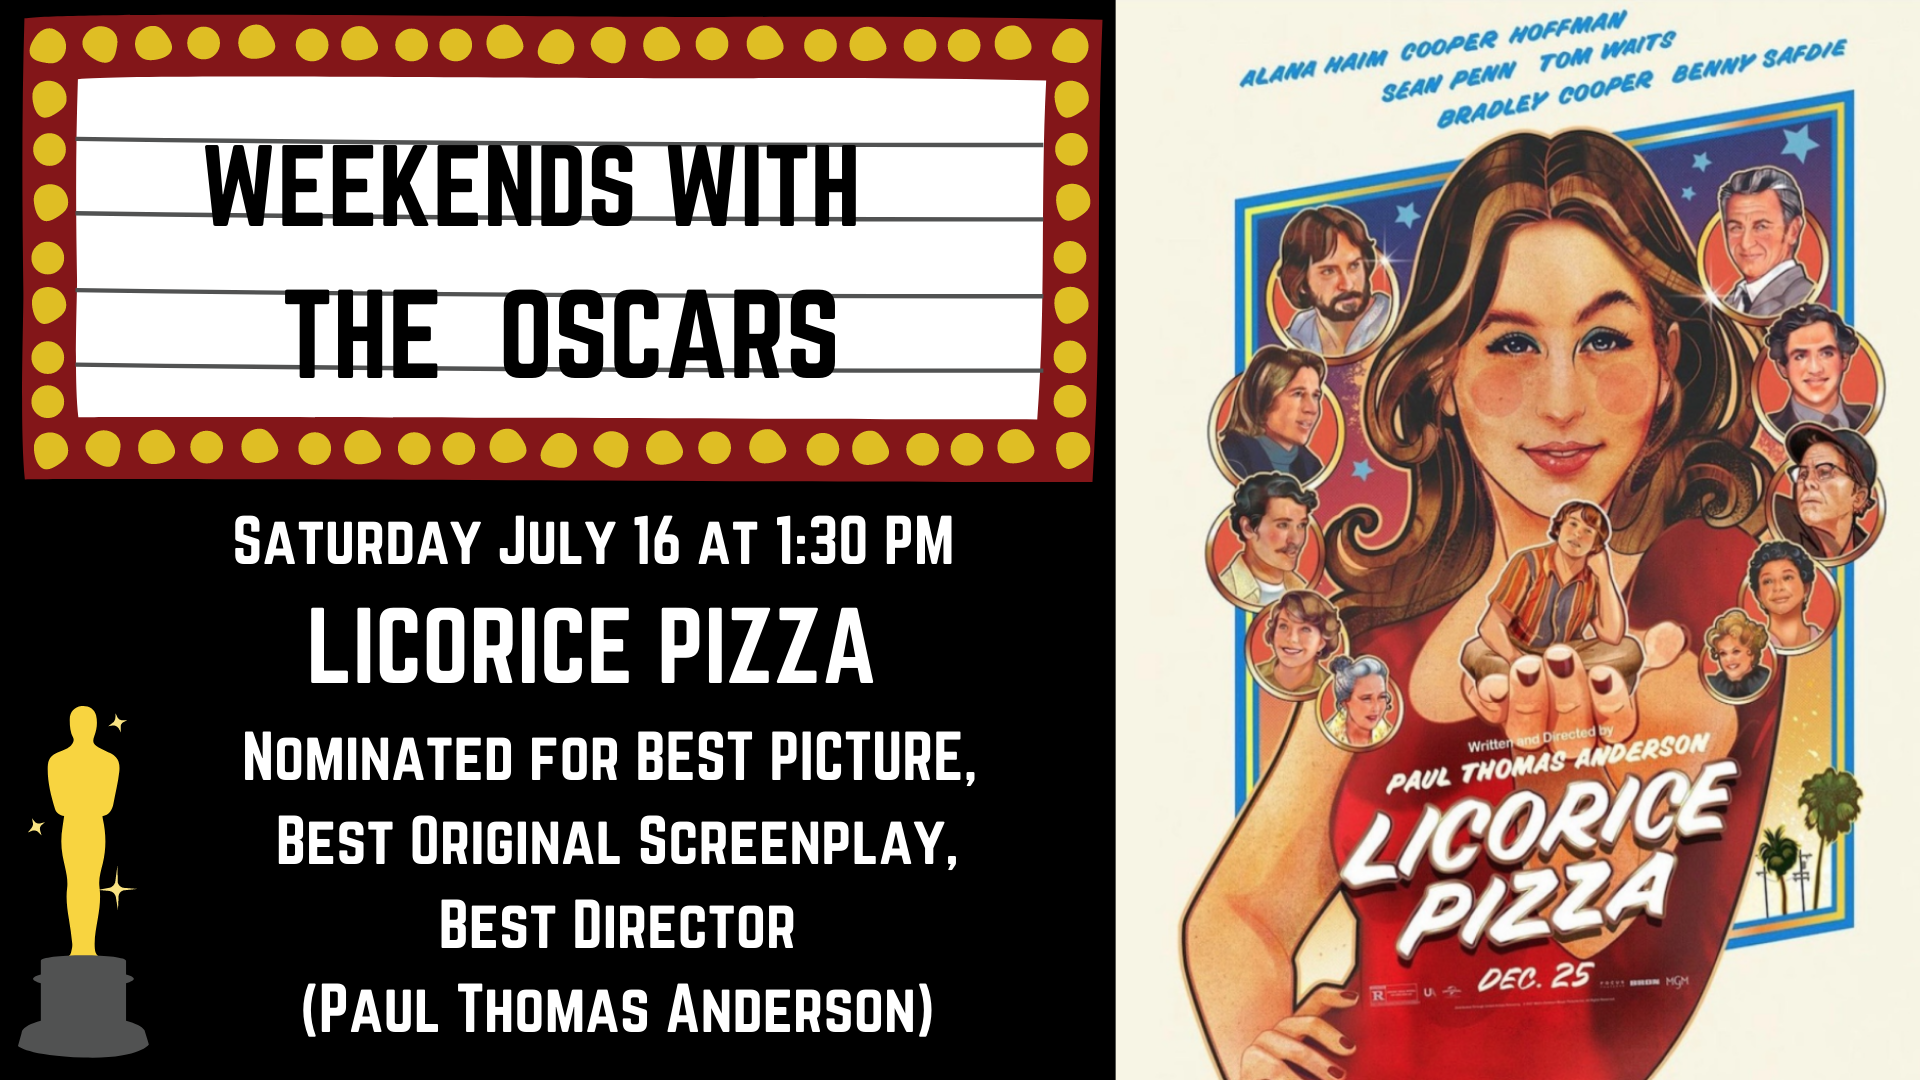 Banner advertising our screening of LICORICE PIZZA on July 16 at 1:30 PM, featuring the movie poster.